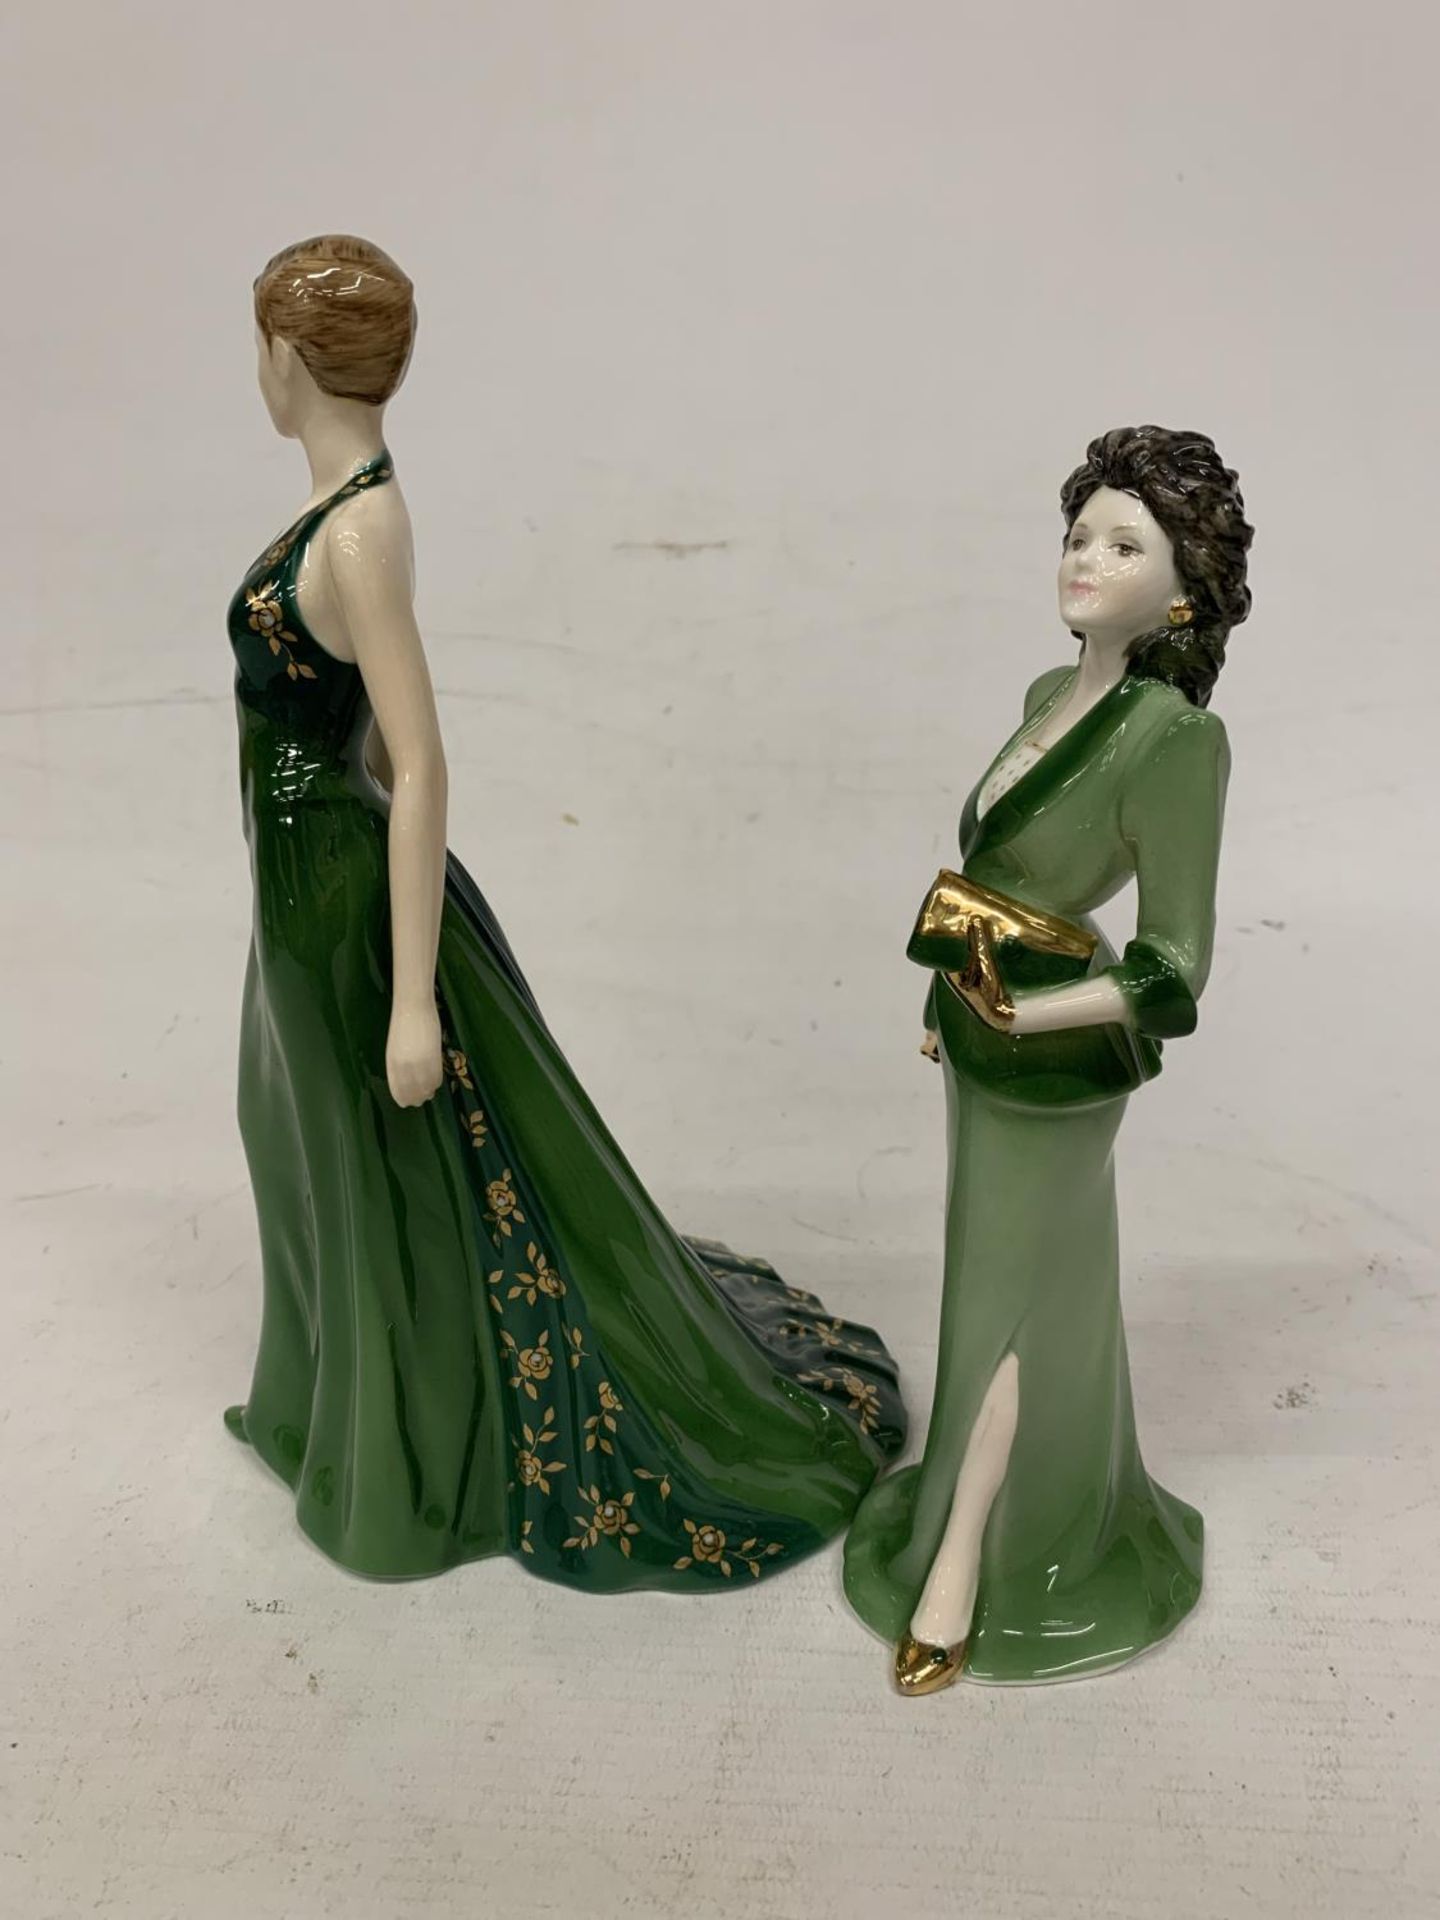 TWO COALPORT FIGURINES "VIVIEN" FROM THE WESTEND GIRLS COLLECTION (1992) AND "SAMANTHA" FIGURE OF - Image 4 of 5